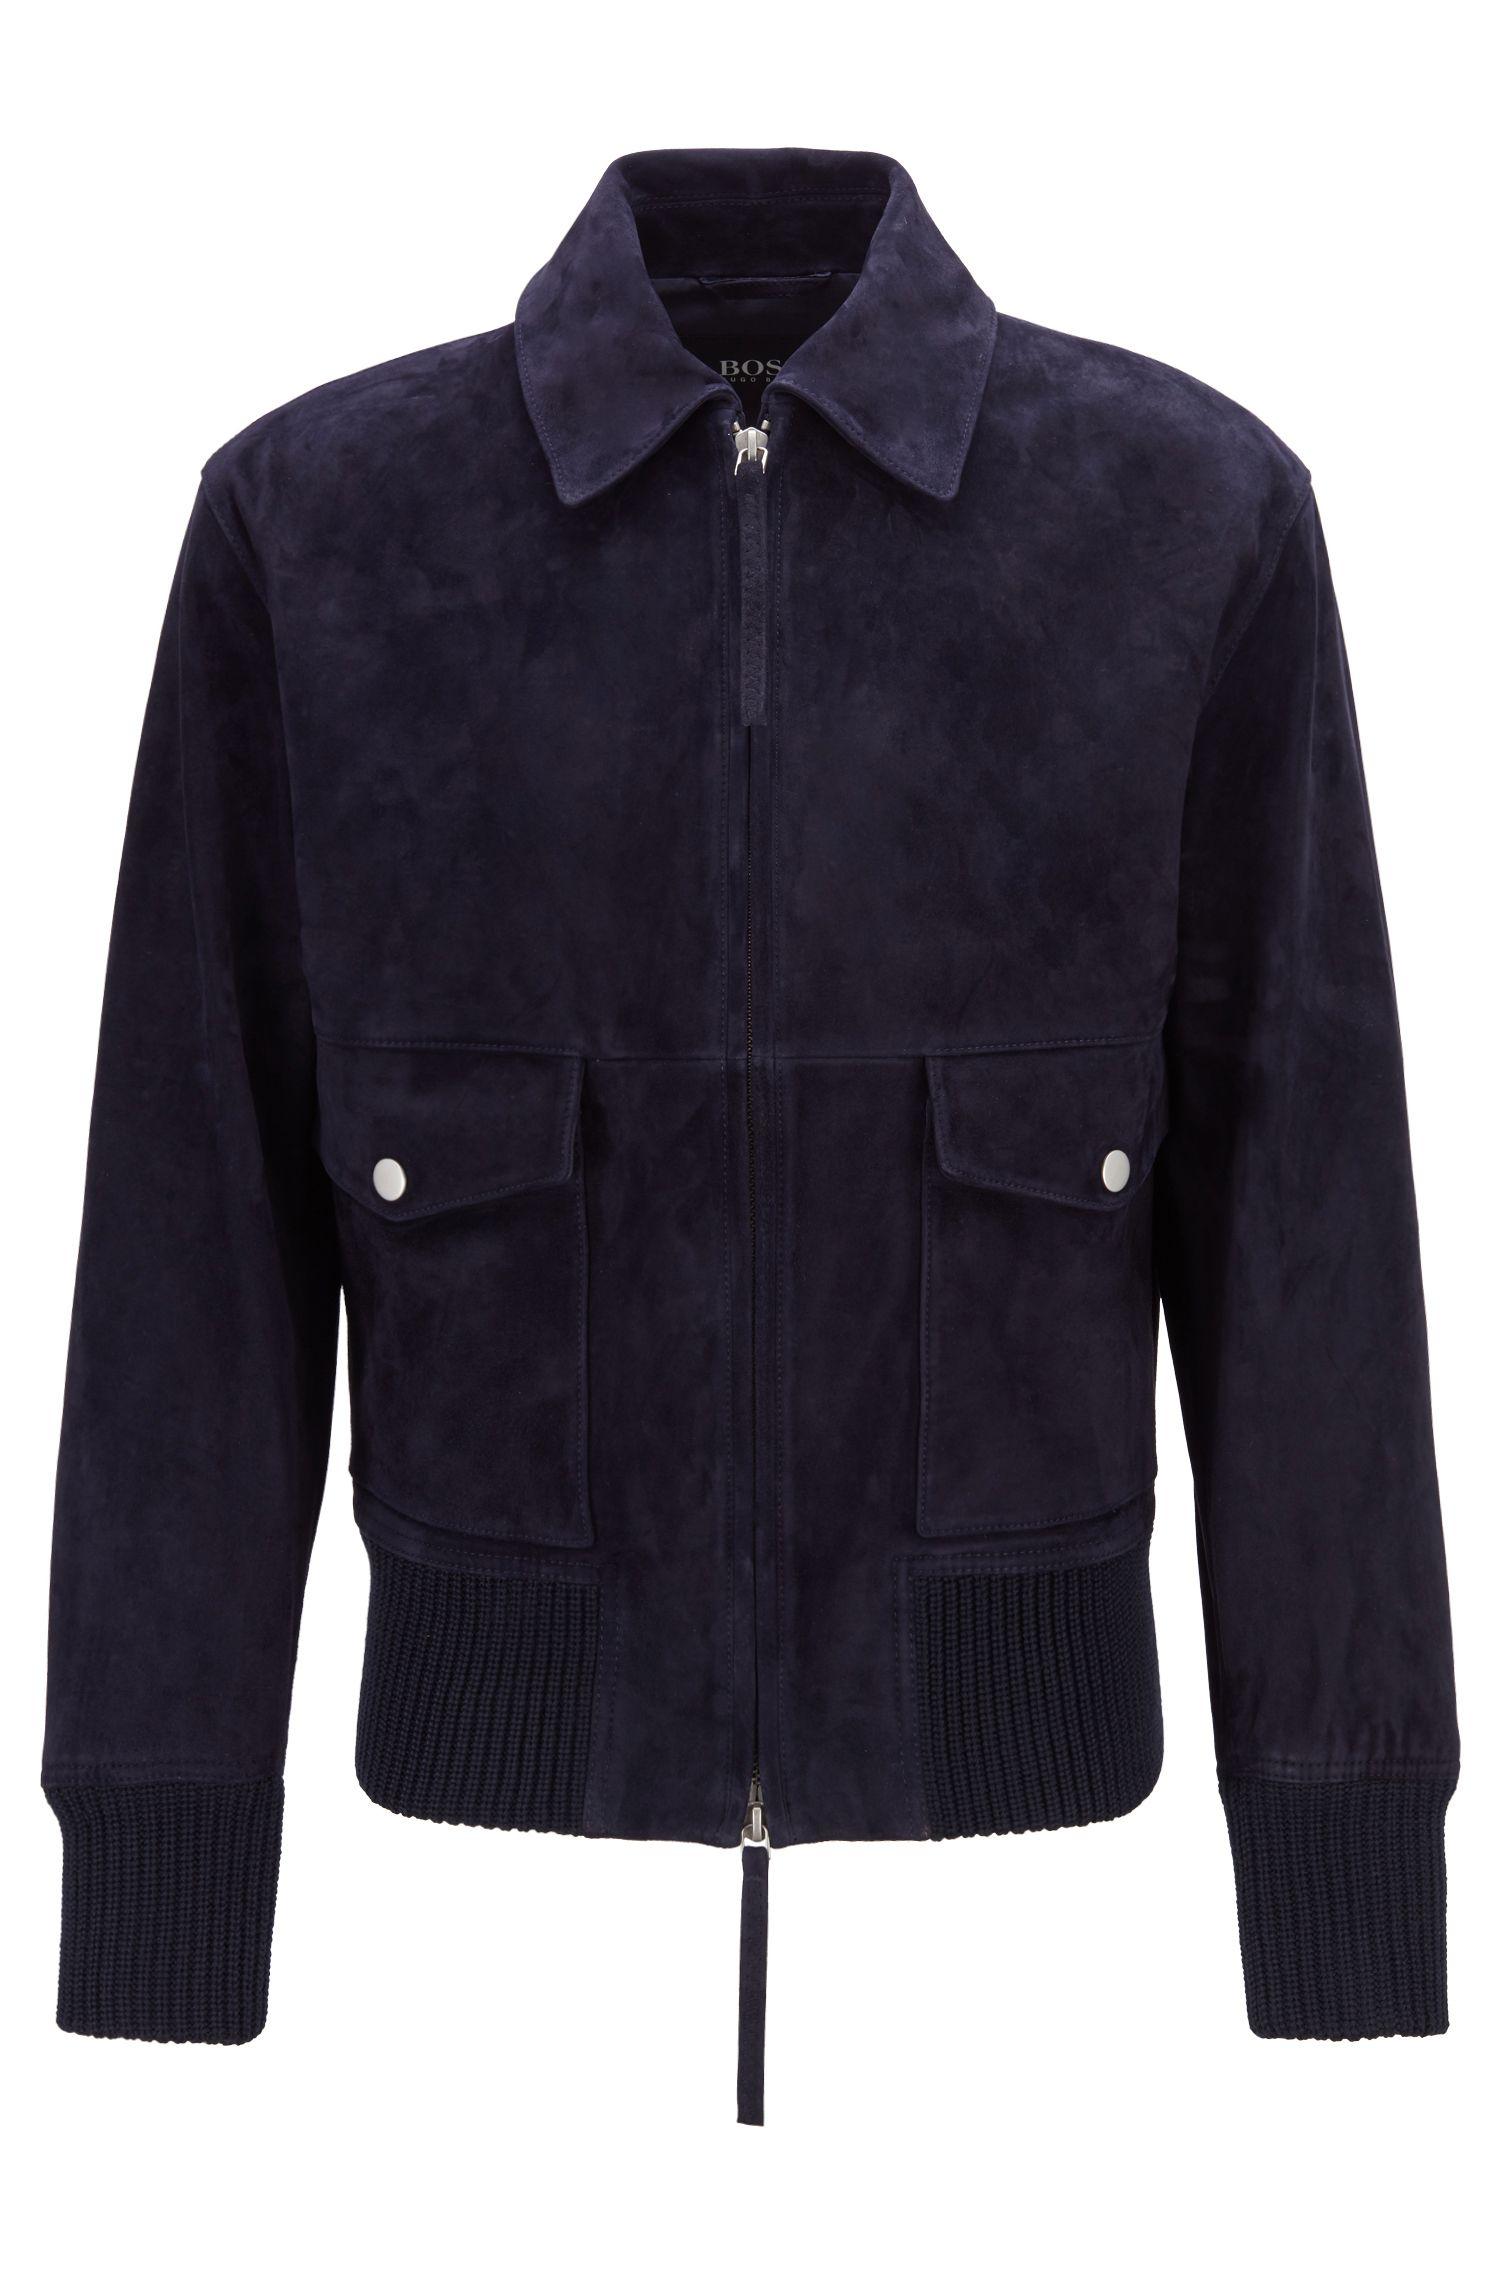 BOSS Fashion Show Harrington Jacket In Soft-touch Suede in Blue for Men ...